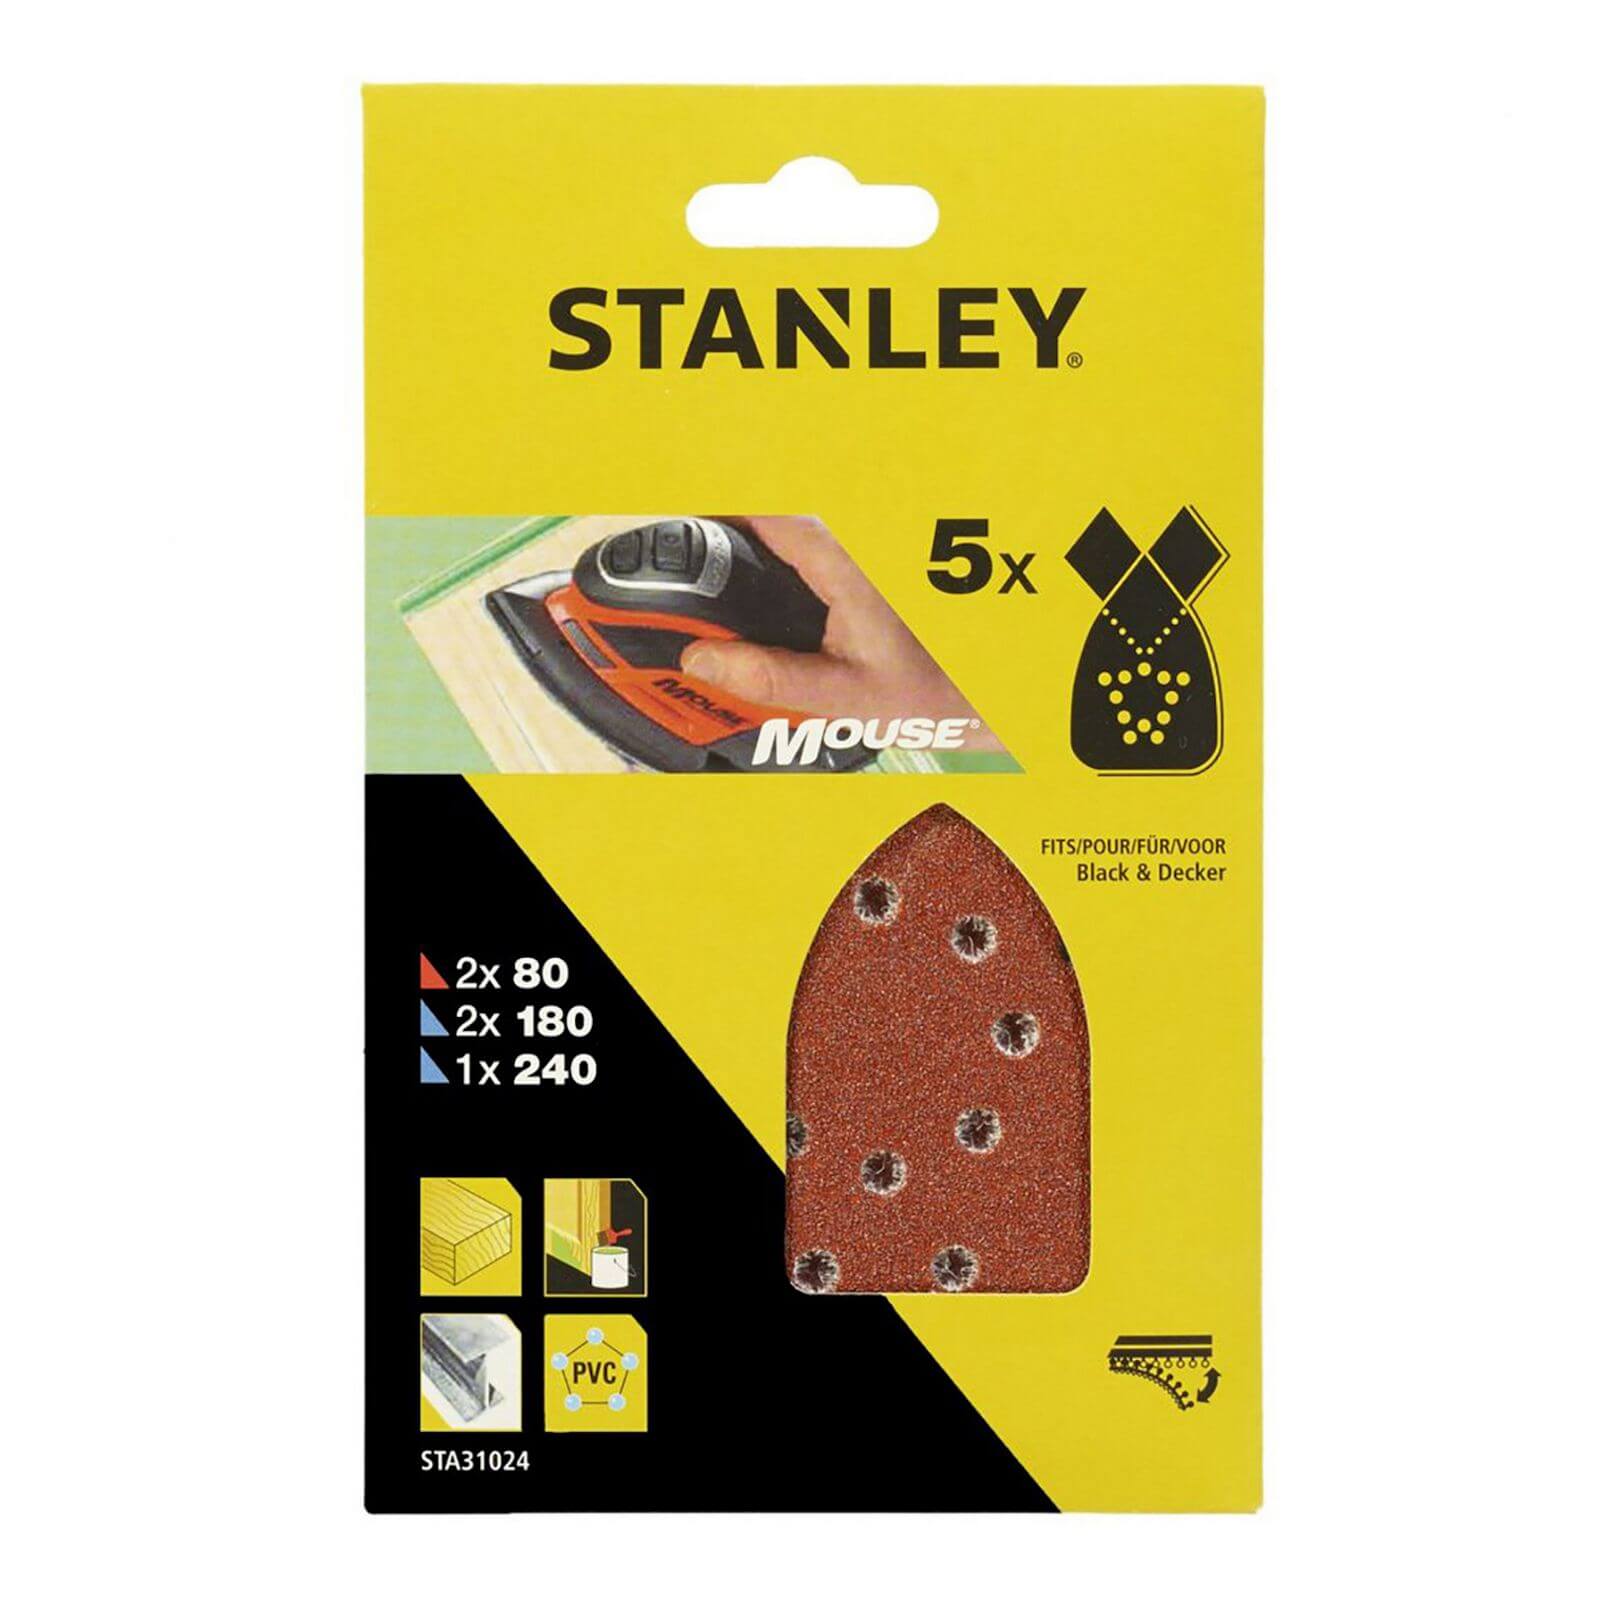 Stanley Mouse Sanding Sheets Mixed Pack - STA31024-XJ